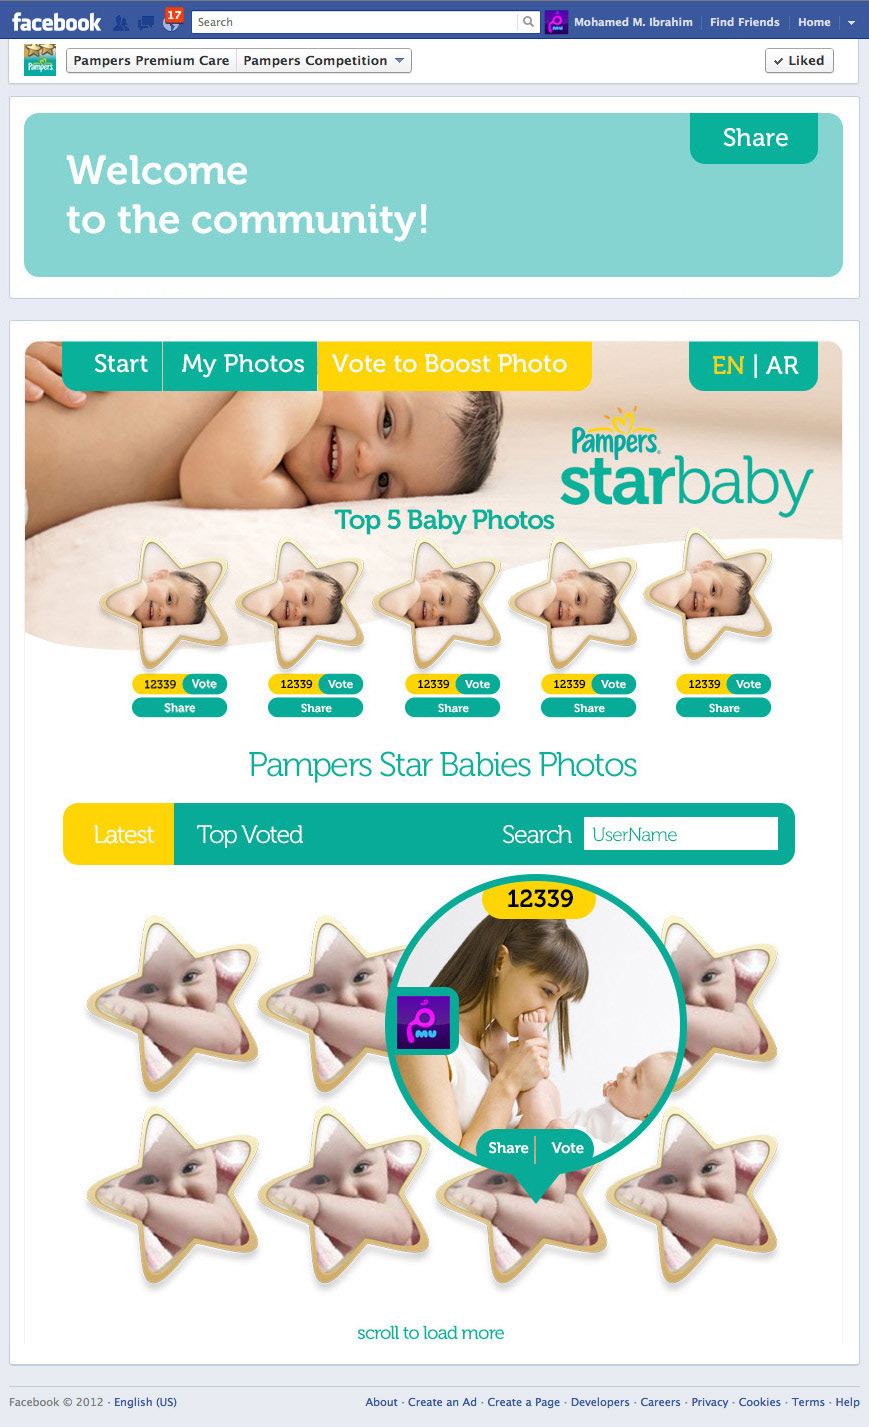 Pampers egypt arabic application star Competition photos baby